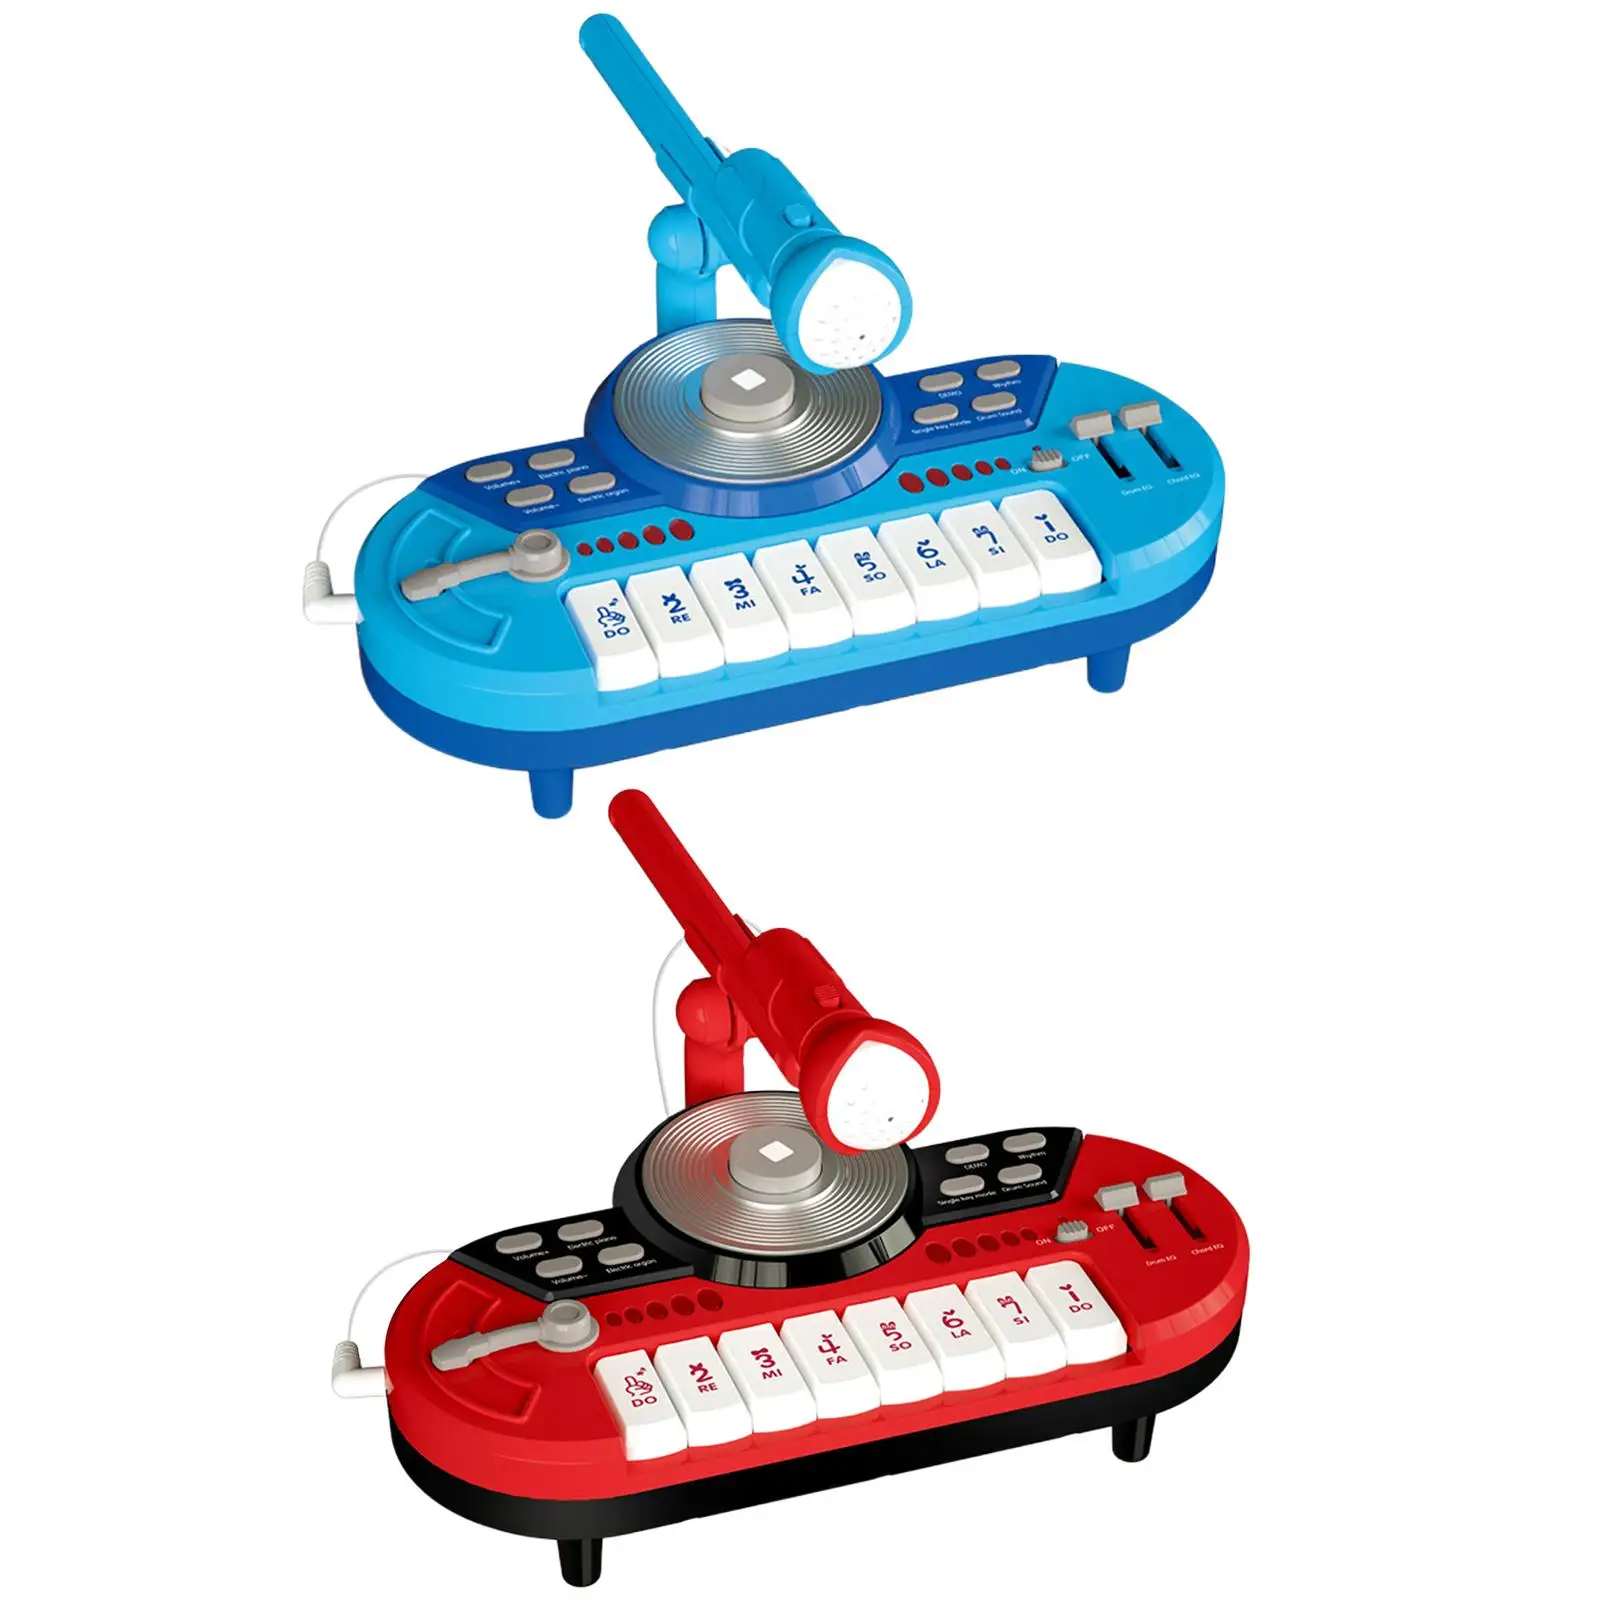 

DJ Mixer Toys Turntable Toy Built in Microphone Rhythm 8 Keys Keyboard Piano Musical Toys for Children's Day Party Kids Toddler